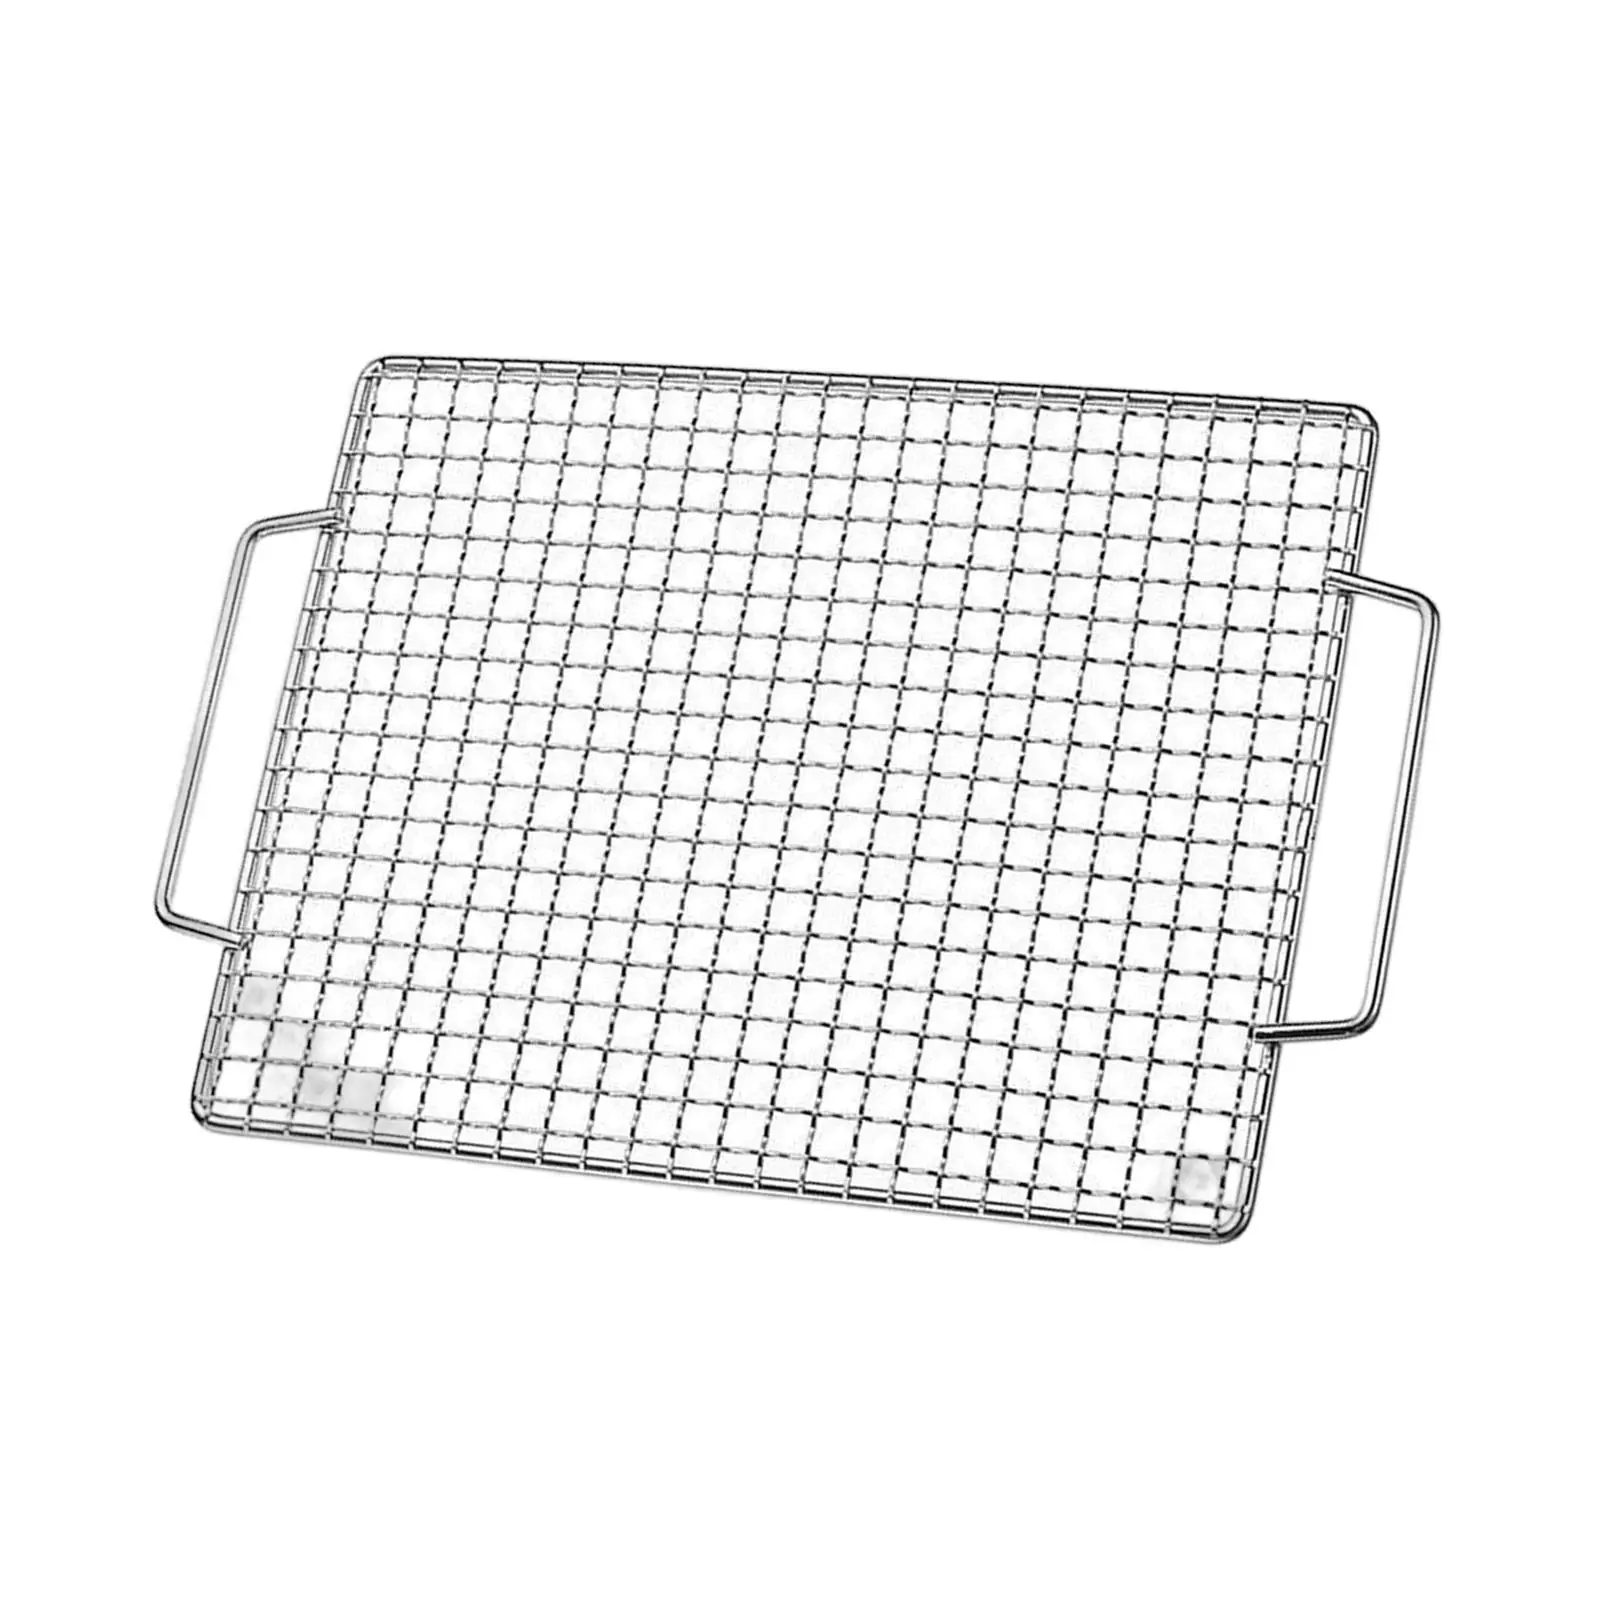 Portable Barbecue Grill Net Multifunction Stainless Steel Grill Pan Mesh for Cooking Camping Picnic Tool Garden Baking